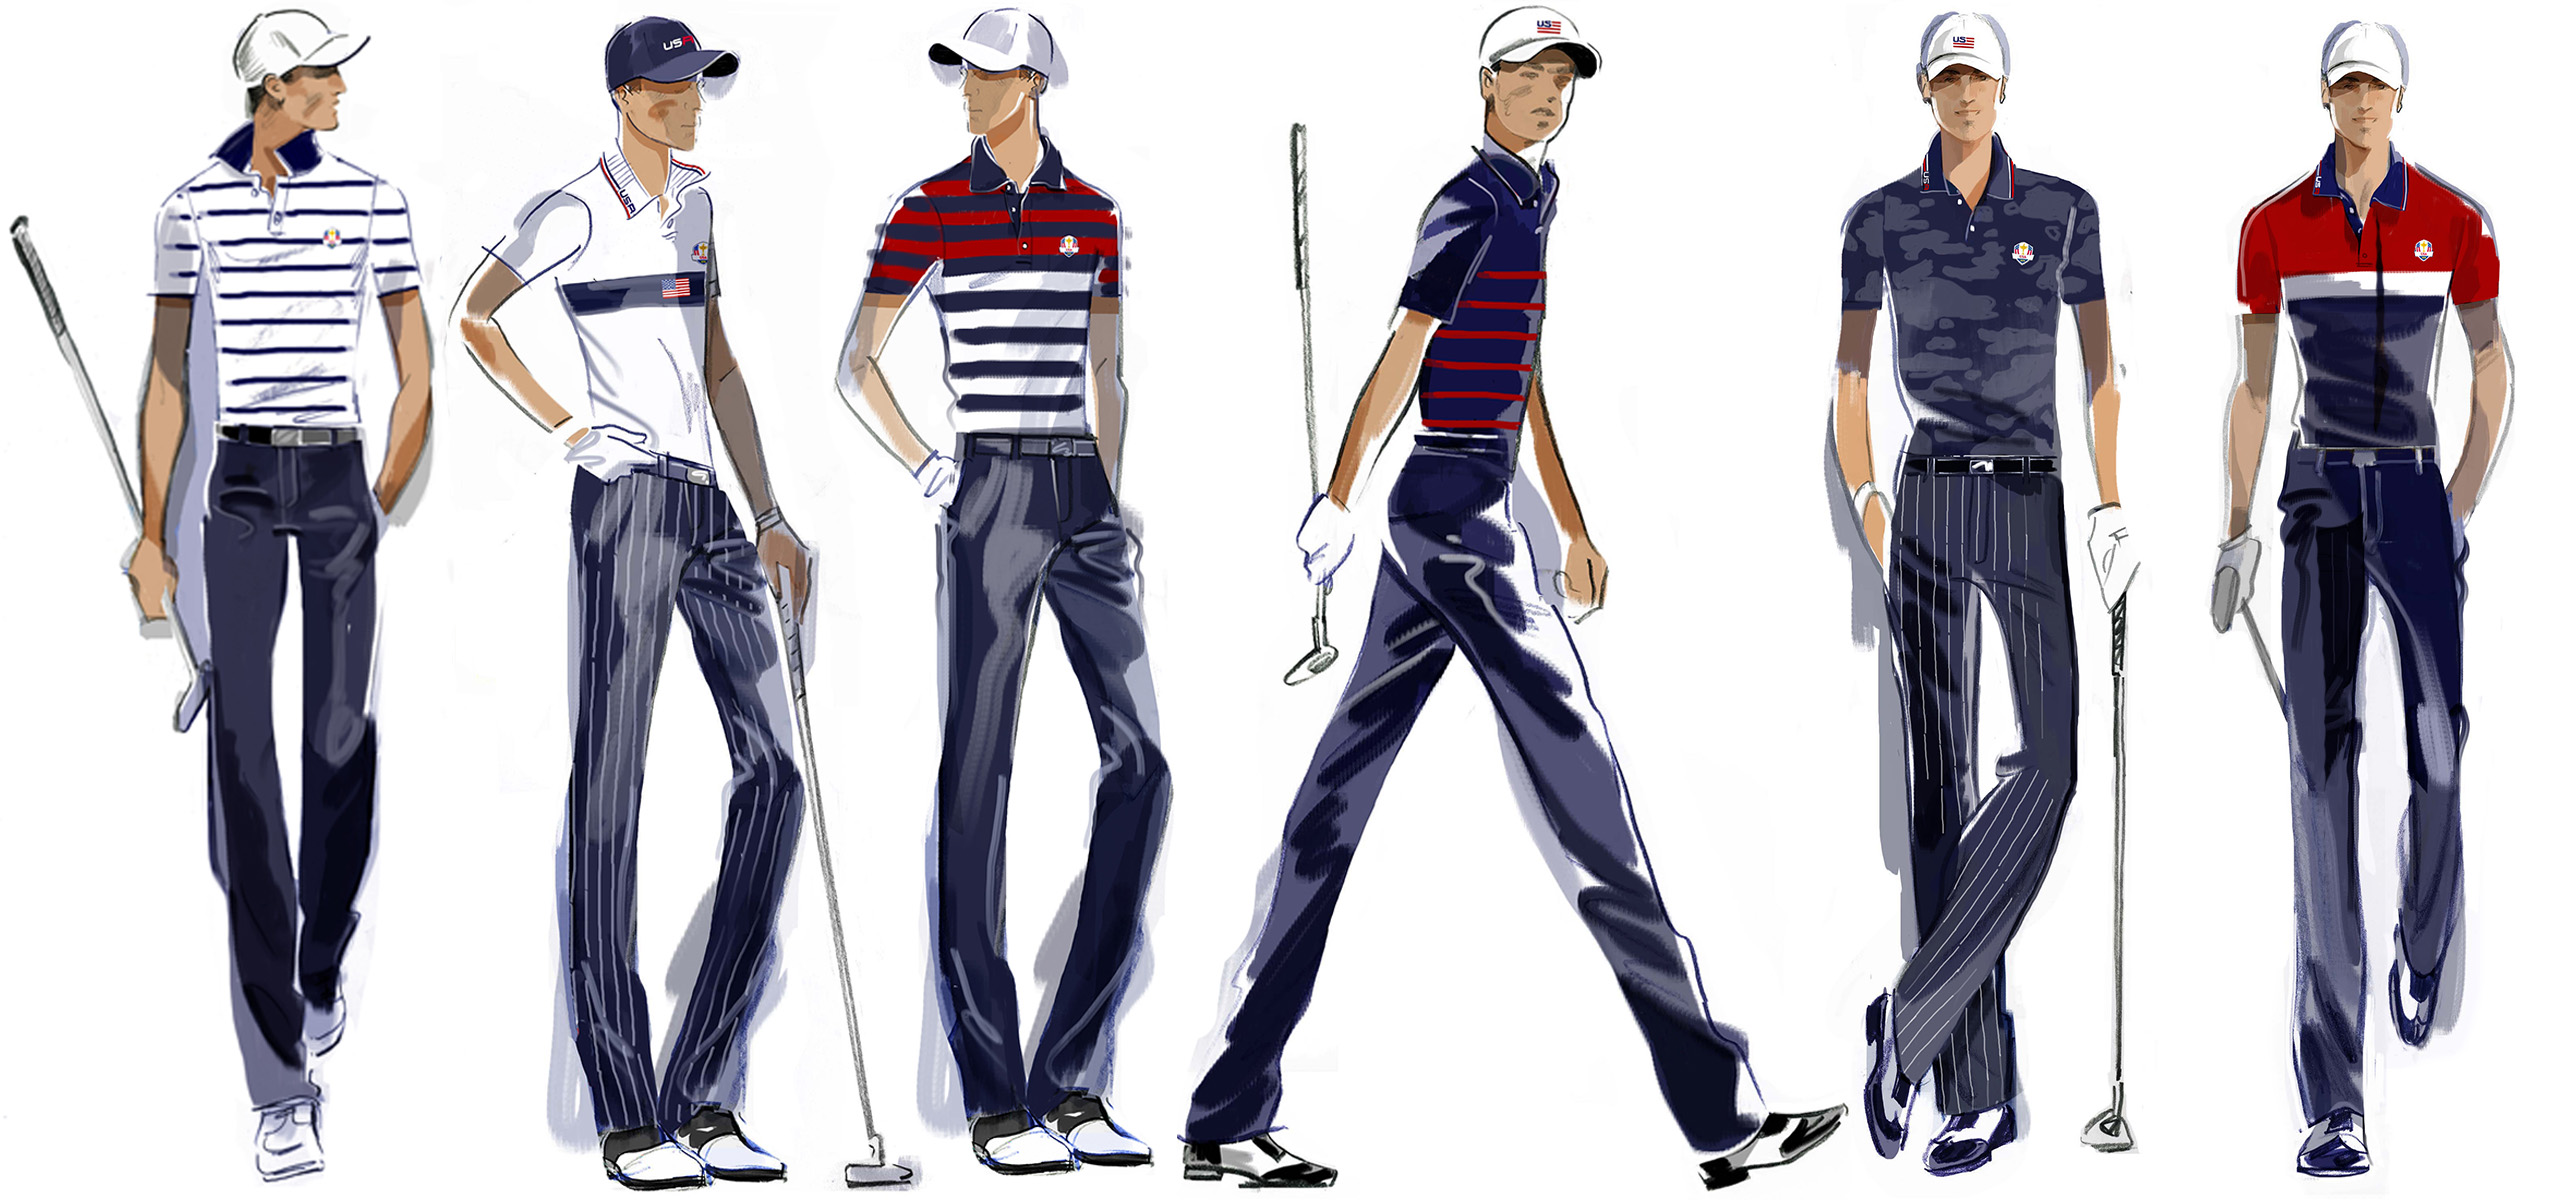 Ralph Lauren Introduces US Ryder Cup Collection - Boardroom